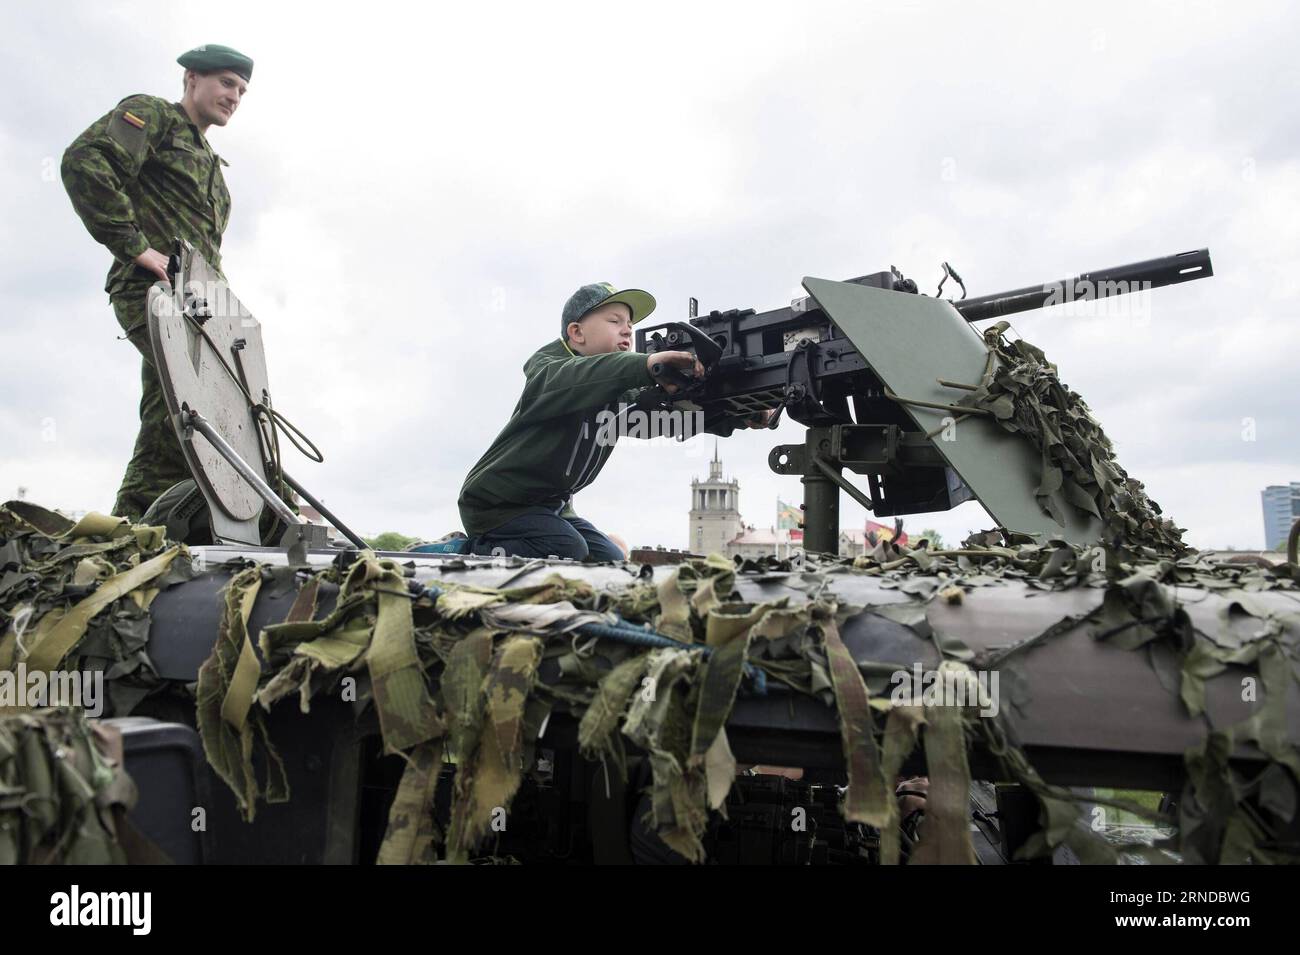 (160515) -- VILNIUS, May 14, 2016 -- A child is experiencing a machine gun of a military vehicle in Vilnius, Lithuania, May 14, 2016. Lithuania celebrates Armed Forces and Public Unity Day in it s captial on Saturday. Troops of Lithuania, Germany, U.S., Luxembourg, Portugal, etc. brought their light weapons, military vehicles and other equipment to the public. Fighting Falcon F-16 of Portuguese air force and Black Hawk of the U.S. air force participated in the performance. ) LITHUANIA-VILNIUS-ARMED FORCES AND PUBLIC UNITY DAY AlfredasxPliadis PUBLICATIONxNOTxINxCHN   160515 Vilnius May 14 2016 Stock Photo